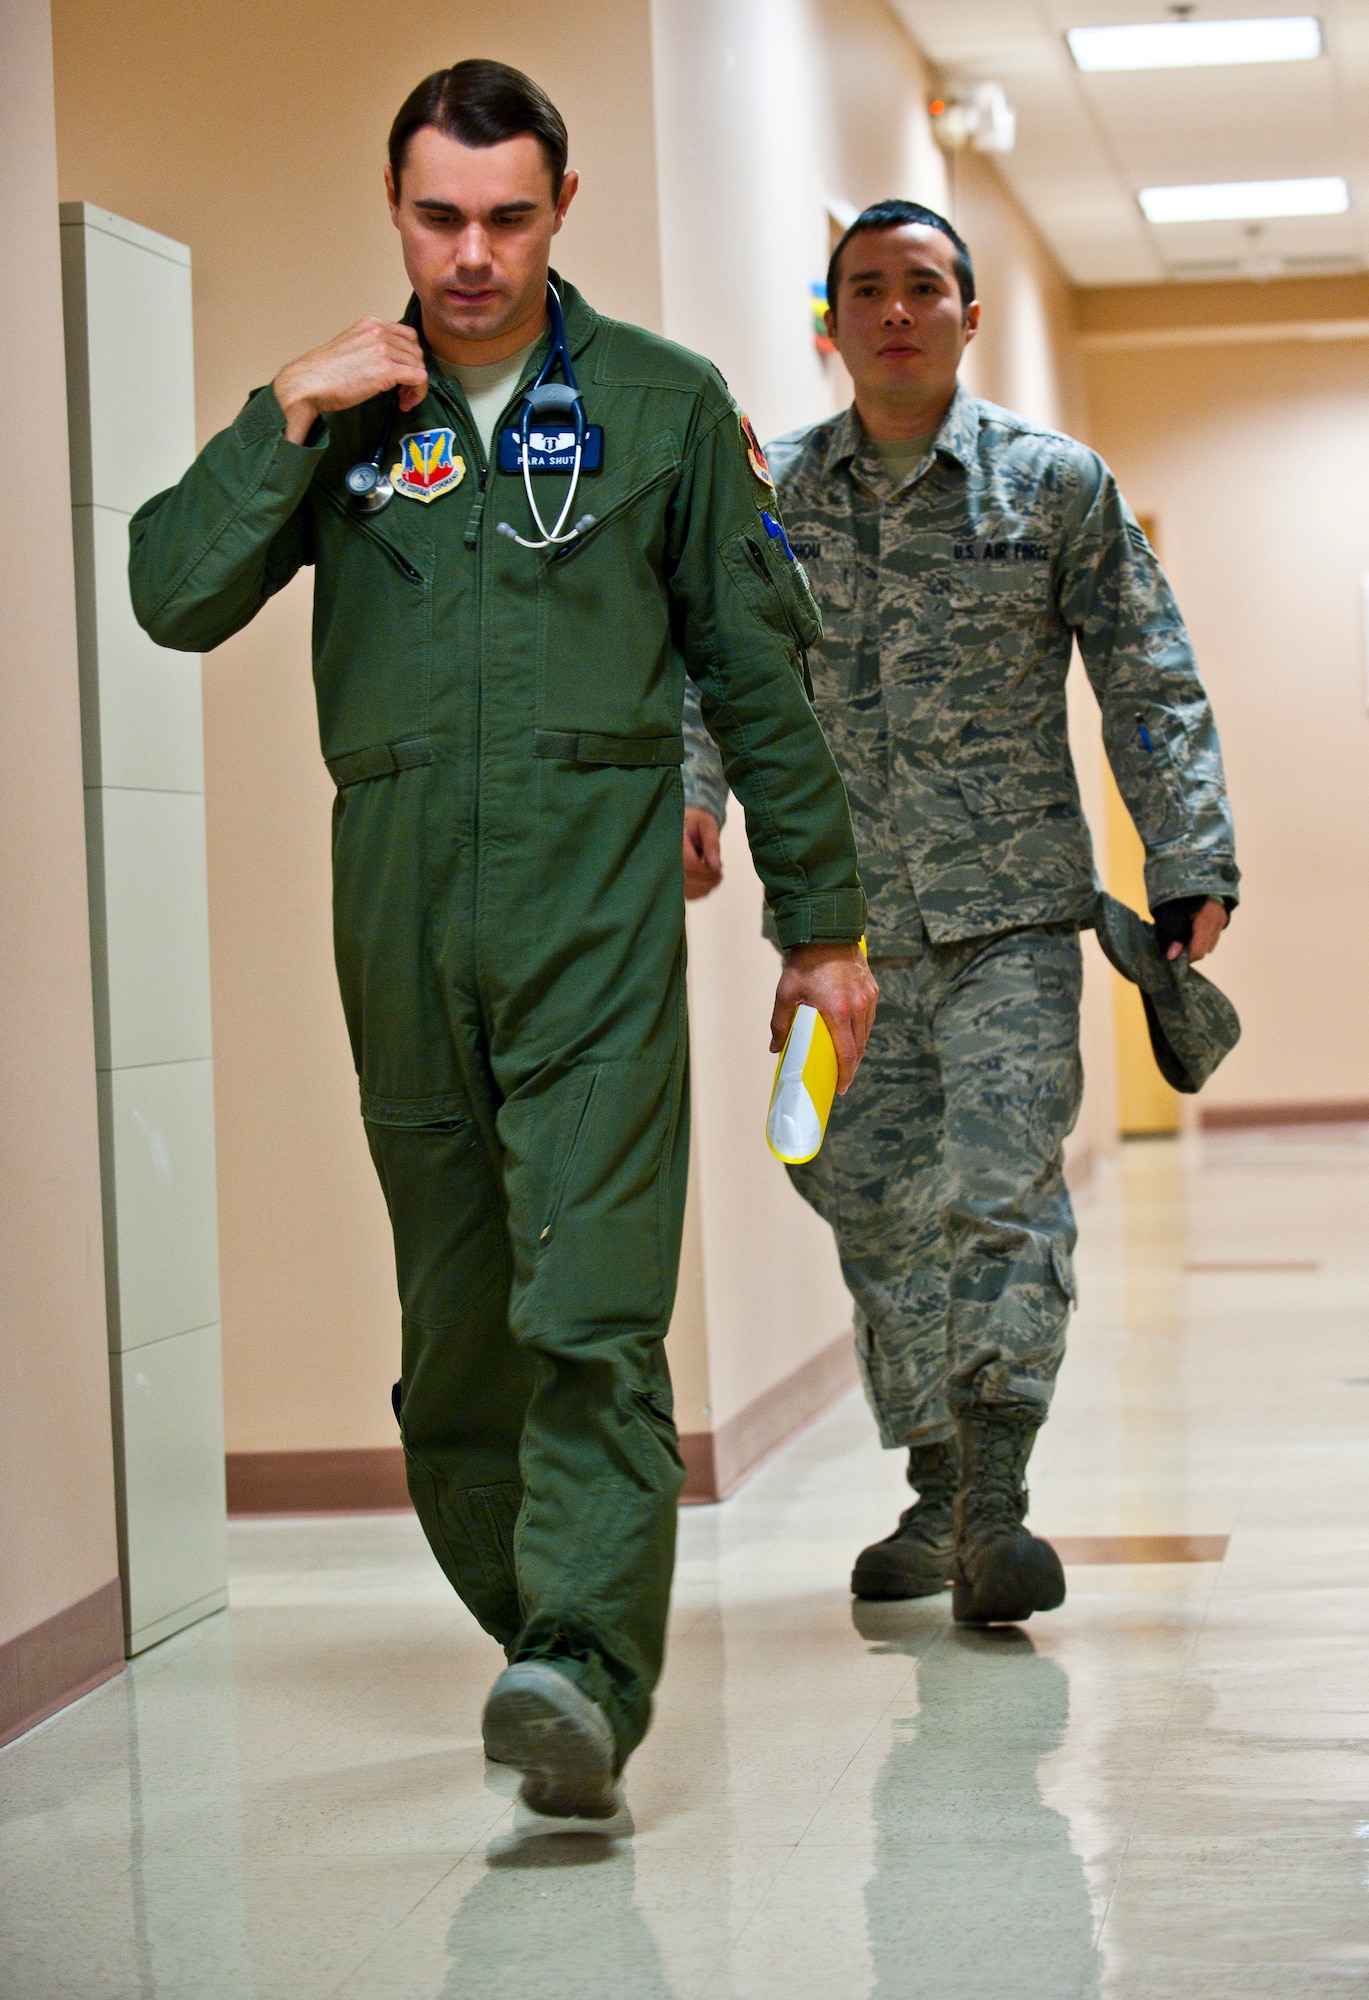 U.S. Air Force Capt. (Dr.) Thomas Shute, 42nd Attack Squadron flight surgeon, walks with his patient, Senior Airman Phou Johnson, 757th Aircraft Maintenance Squadron avionics technician, during an occupational health exam Jan. 10, 2014, at Nellis Air Force Base, Nev. Occupational health exams help flight surgeons have a better understanding of what aircrew members endure in the environments they work in. (U.S. Air Force photo/Senior Airman Brett Clashman)